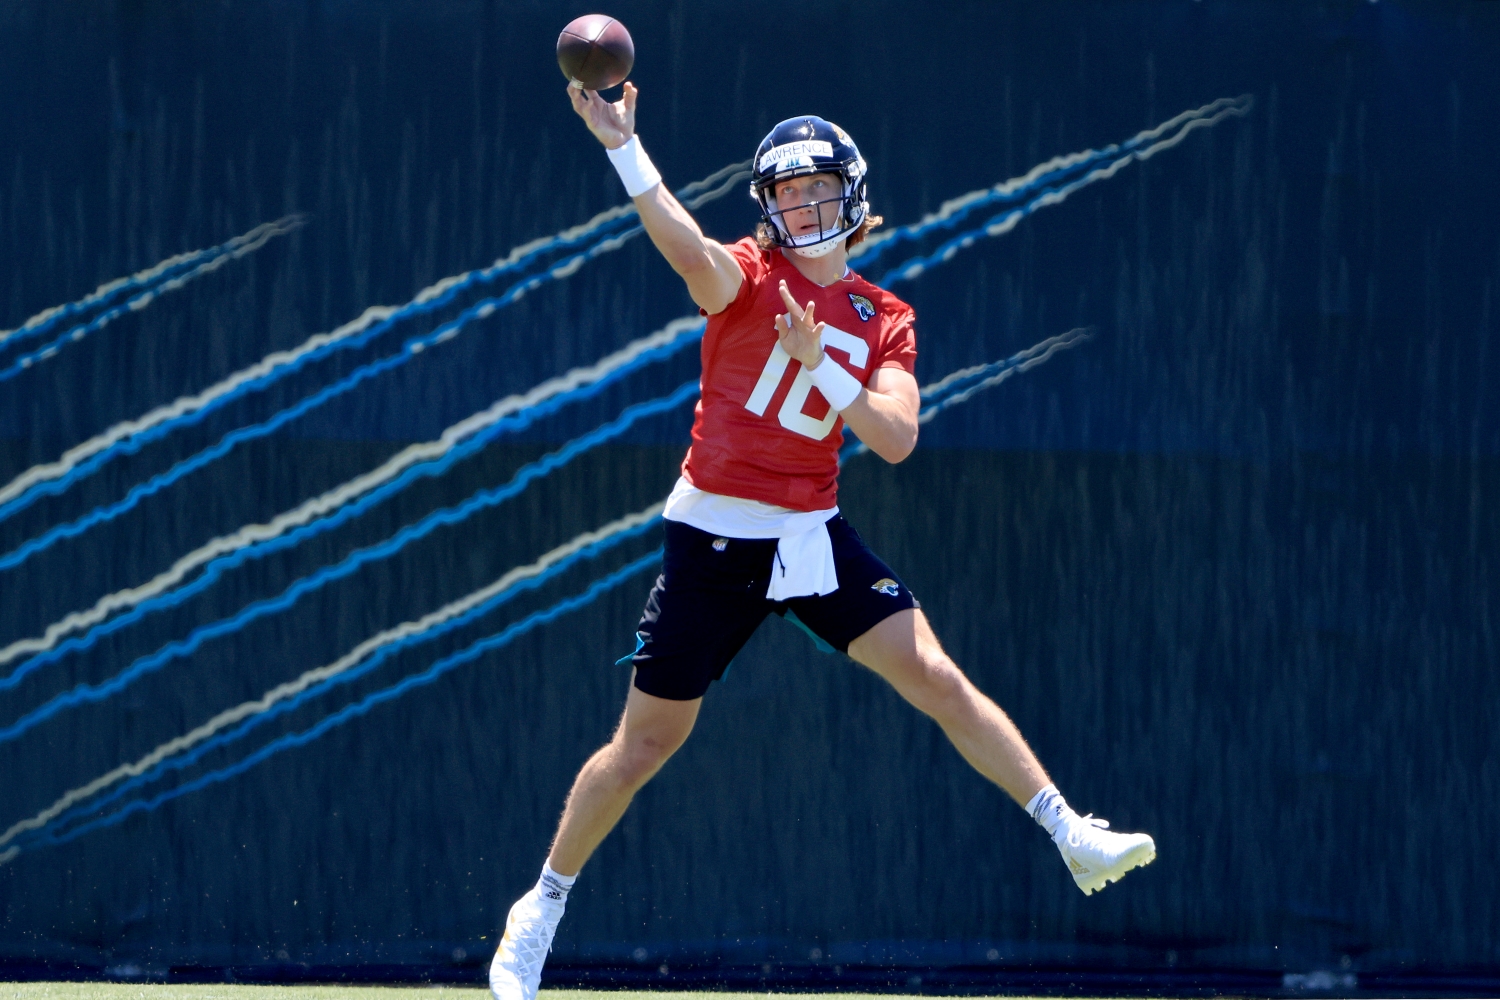 Top 2021 NFL draft pick Trevor Lawrence throws the ball on the run during Jaguars practice on May 15, 2021.